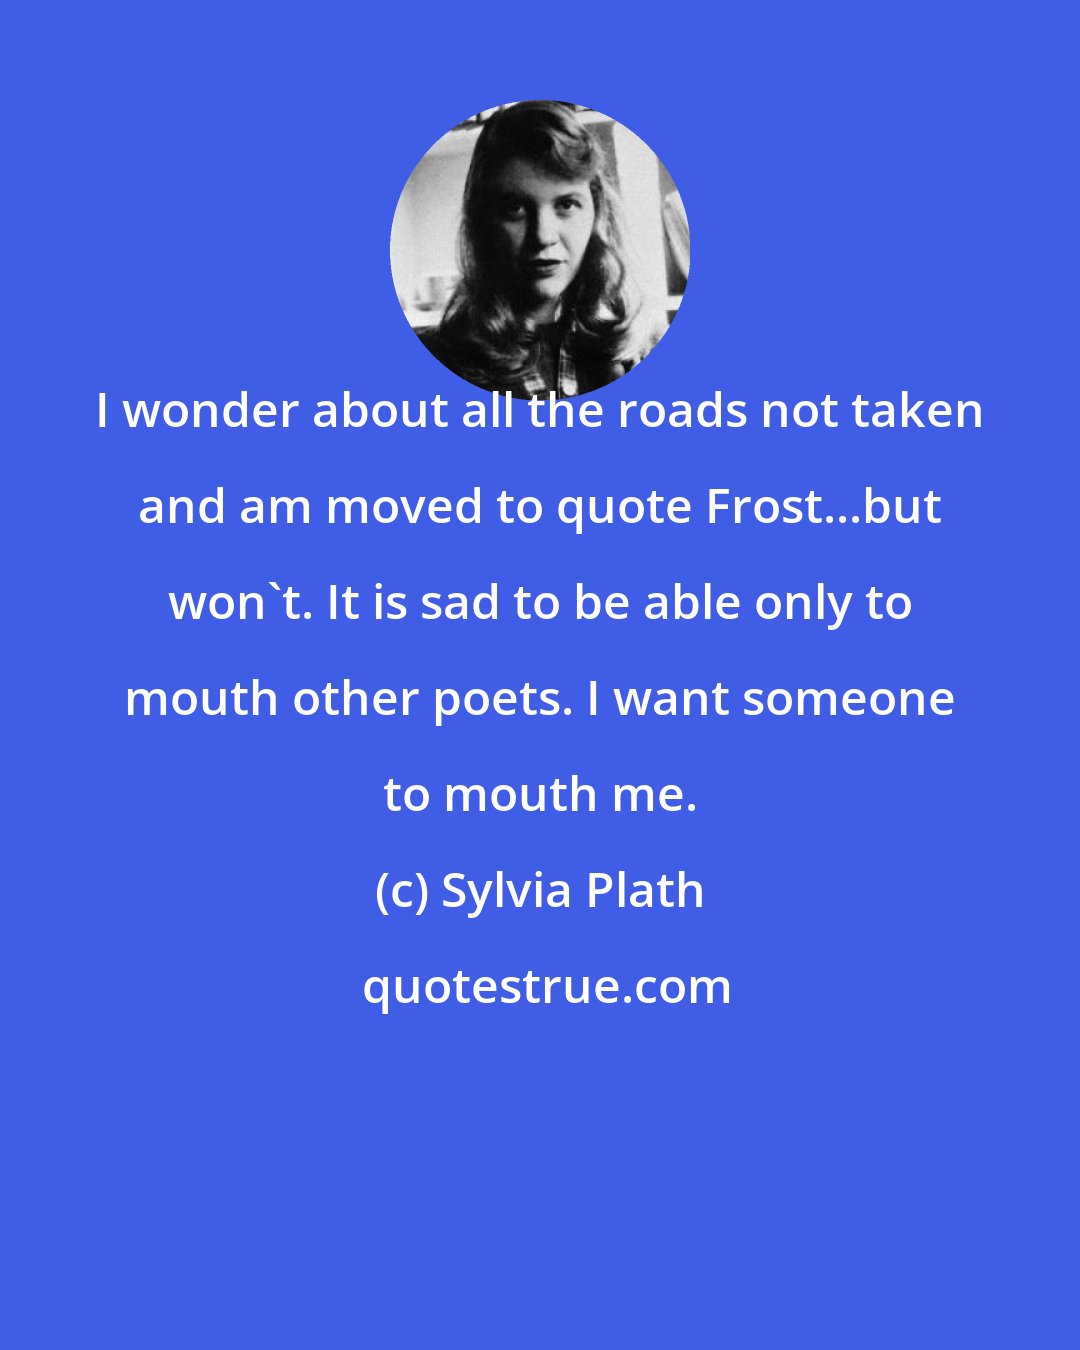 Sylvia Plath: I wonder about all the roads not taken and am moved to quote Frost...but won't. It is sad to be able only to mouth other poets. I want someone to mouth me.